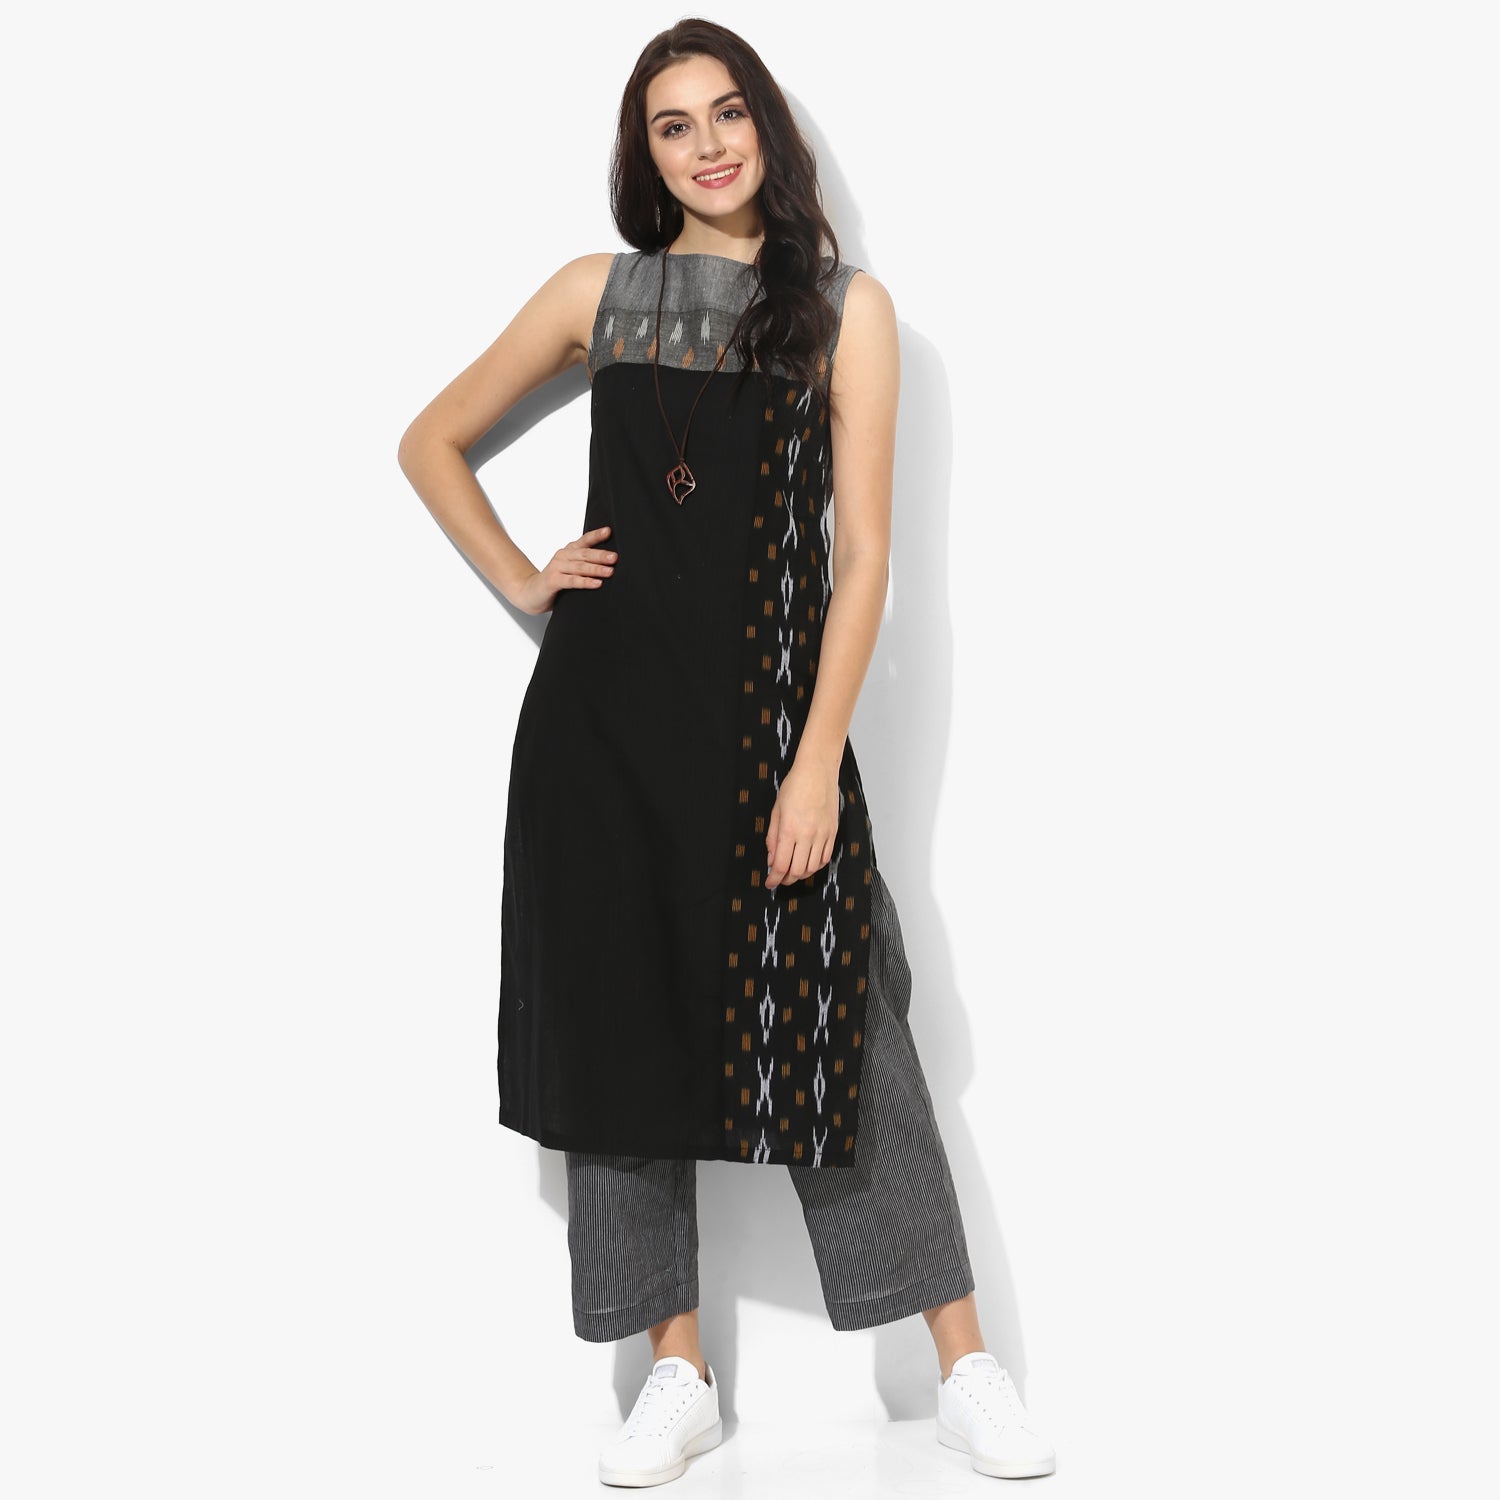 Buy Shivam Creation Black Solid Maxi dress Online at Low Prices in India -  Paytmmall.com